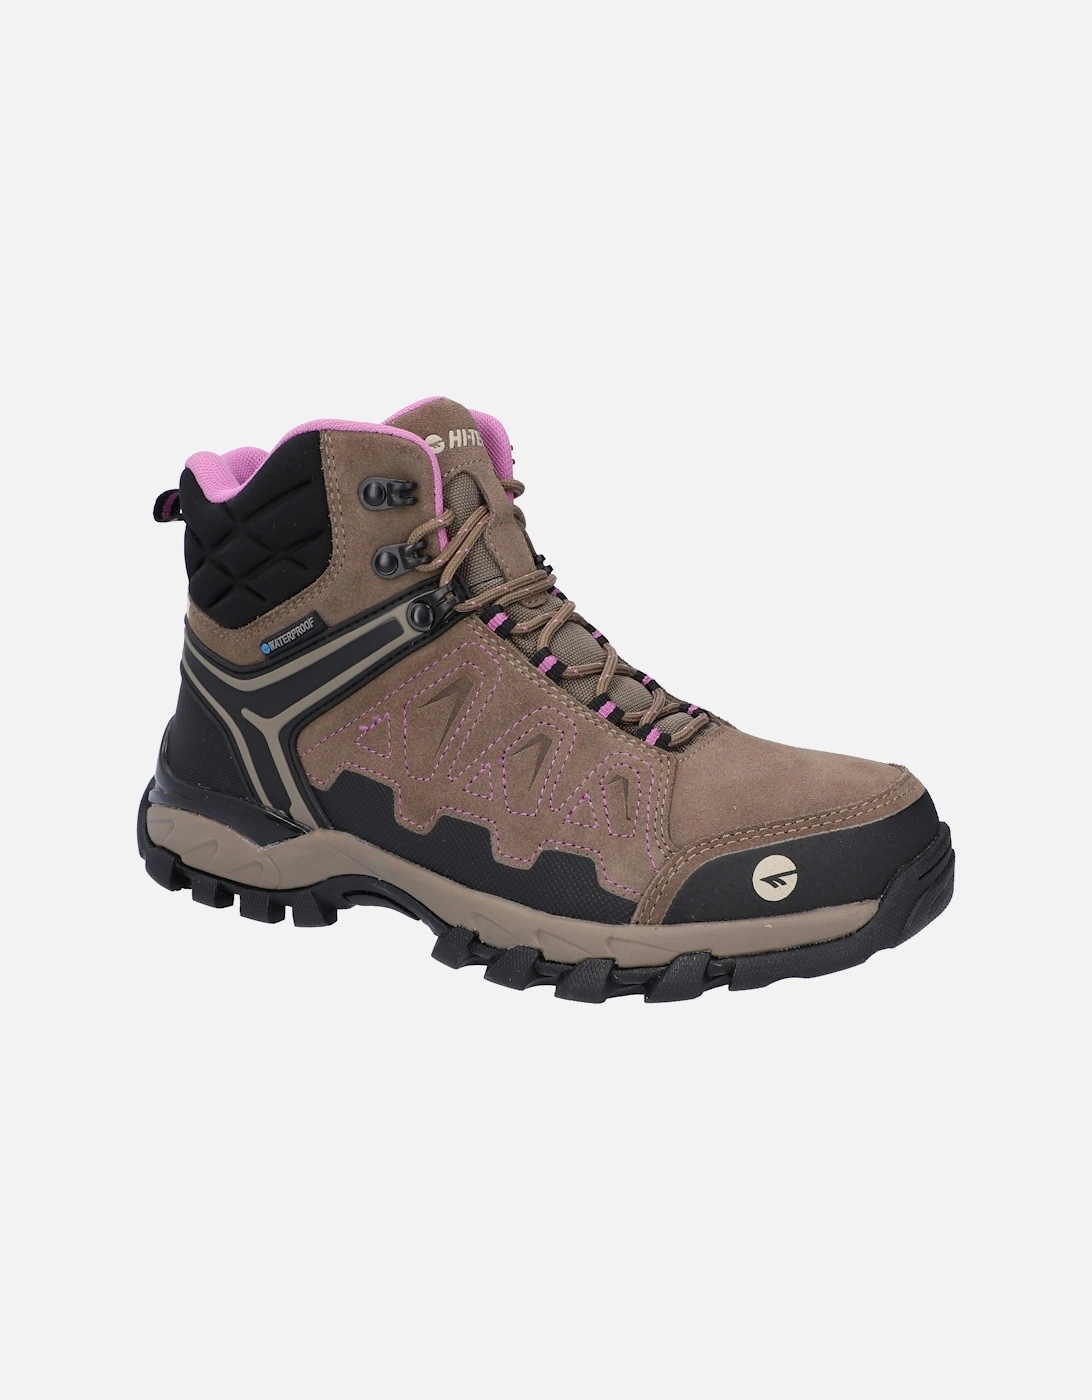 Womens Walking Boots v Lite Explorer Waterproof Lace Up brown UK Size, 6 of 5